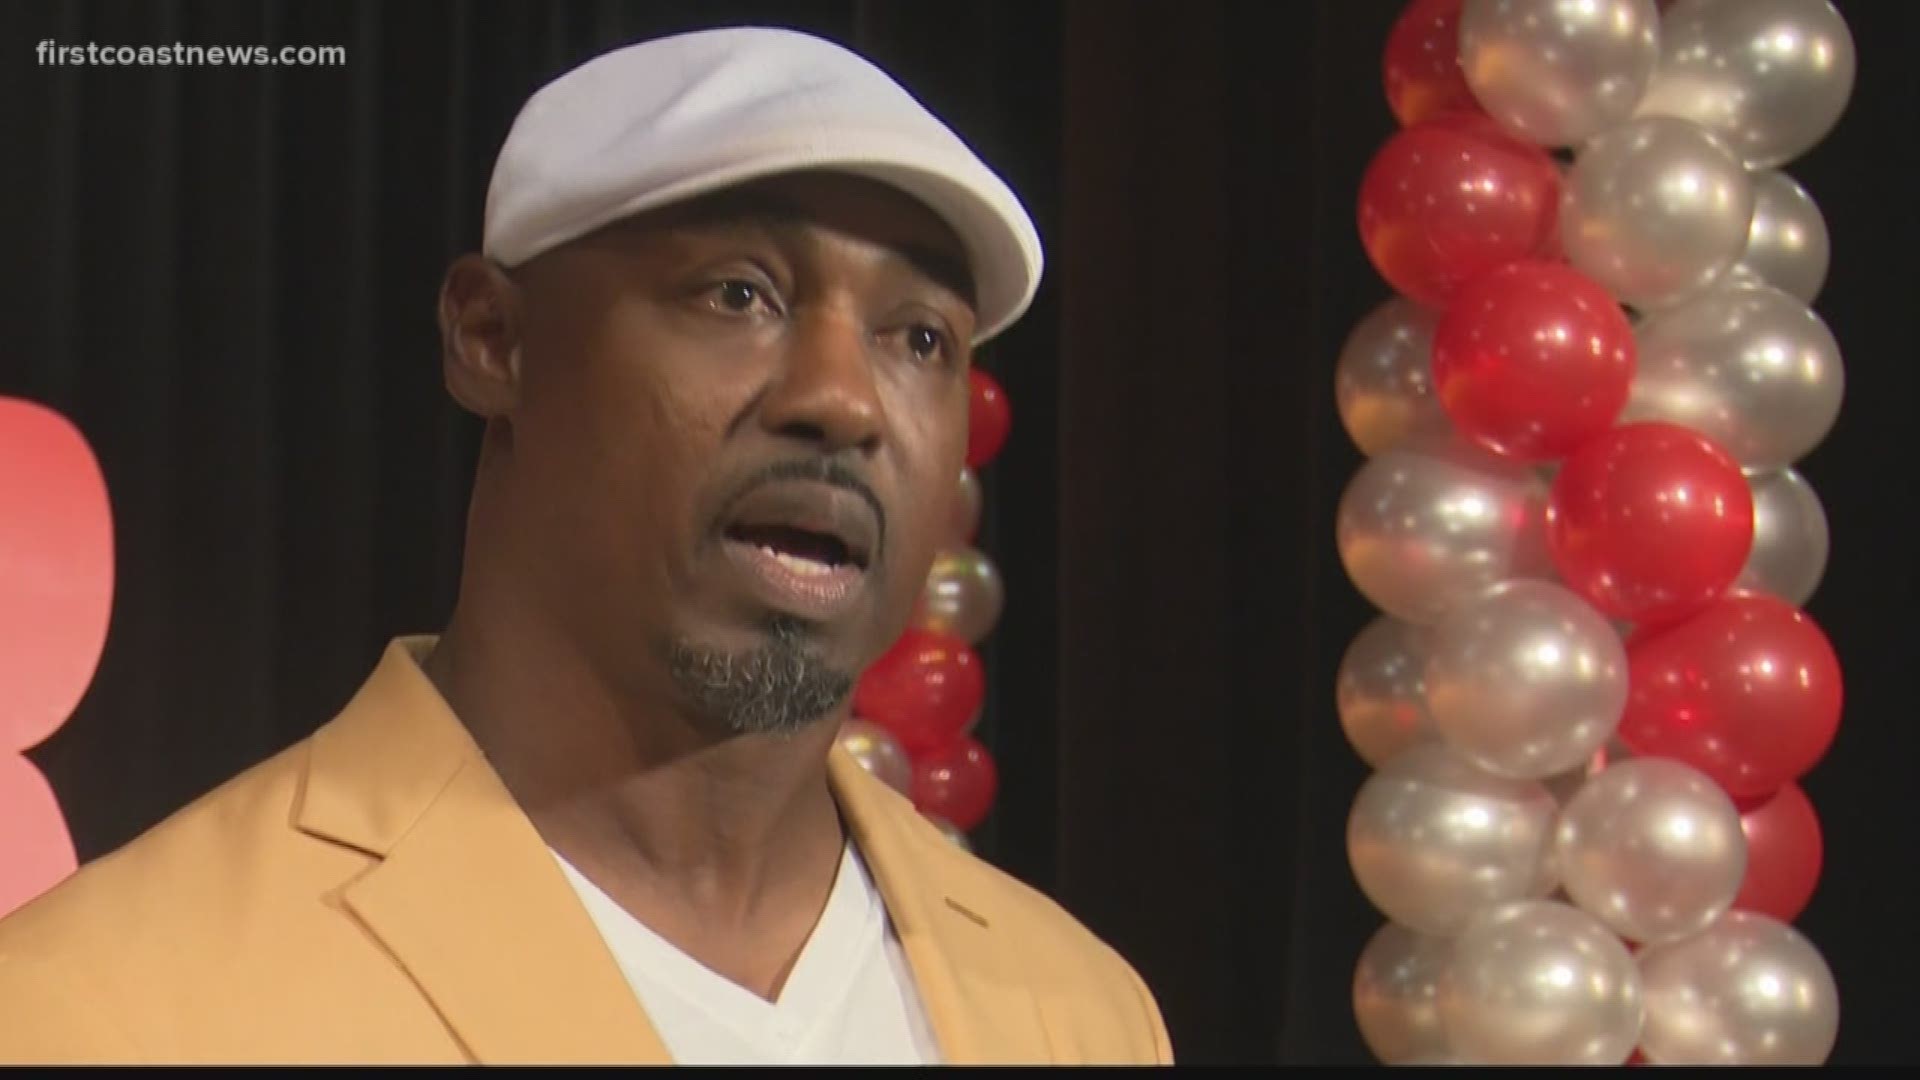 Former athlete Brian Dawkins visited Raines High School, a school he played for as a teen, to inspire students affected violence.